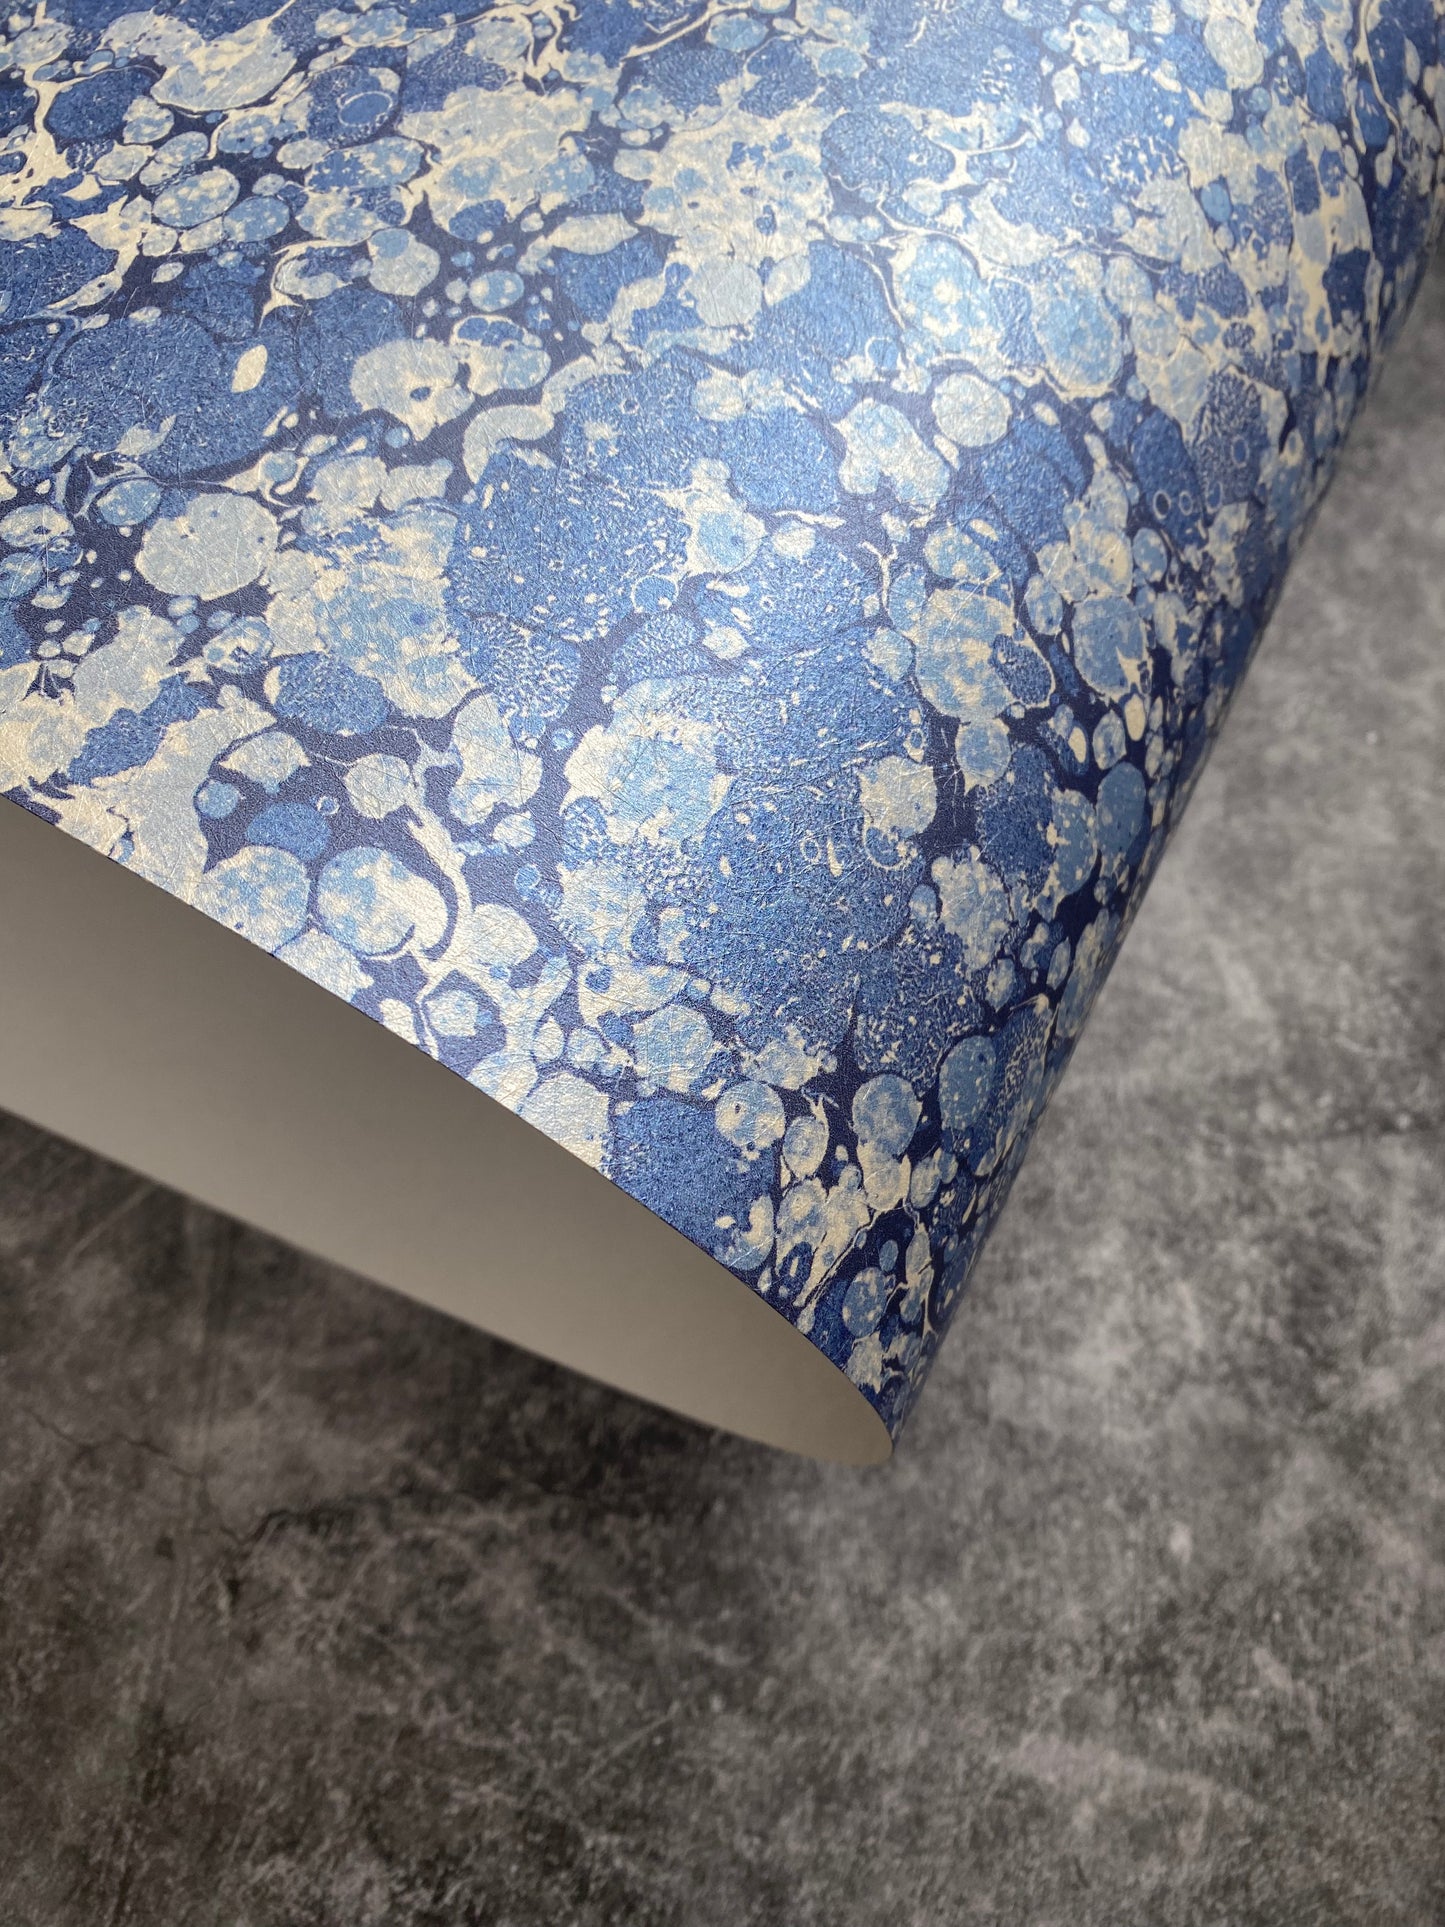 Marbled Wallpaper - 'Ditzy' Col: Blue Daze - Mica Coated Non-Woven